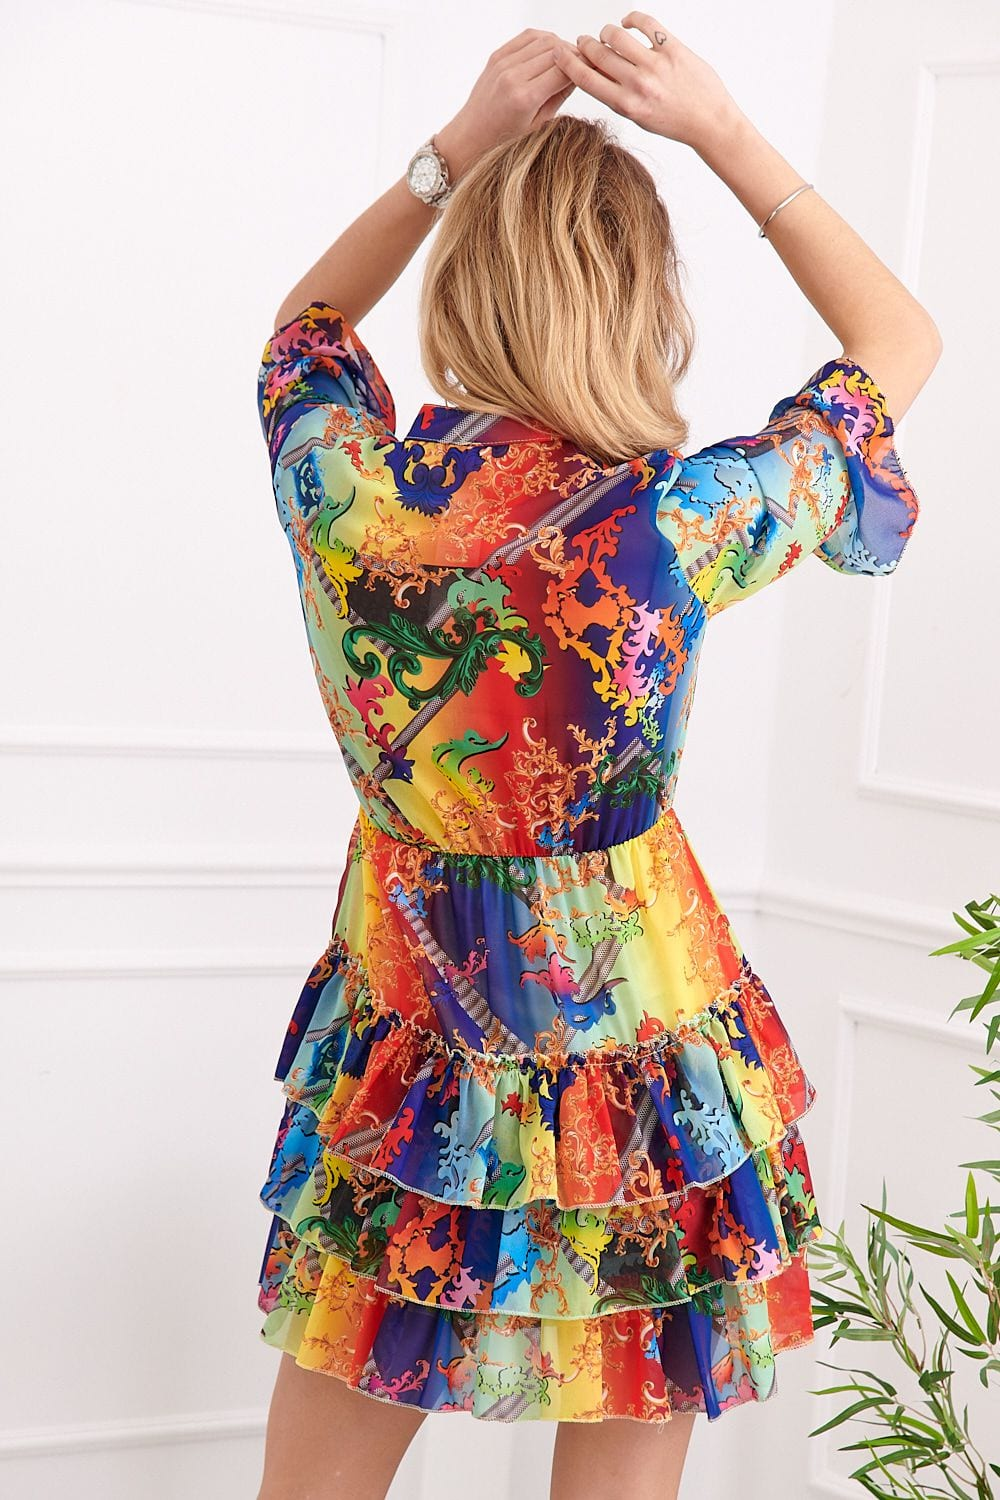 Airy dress with colorful patterns